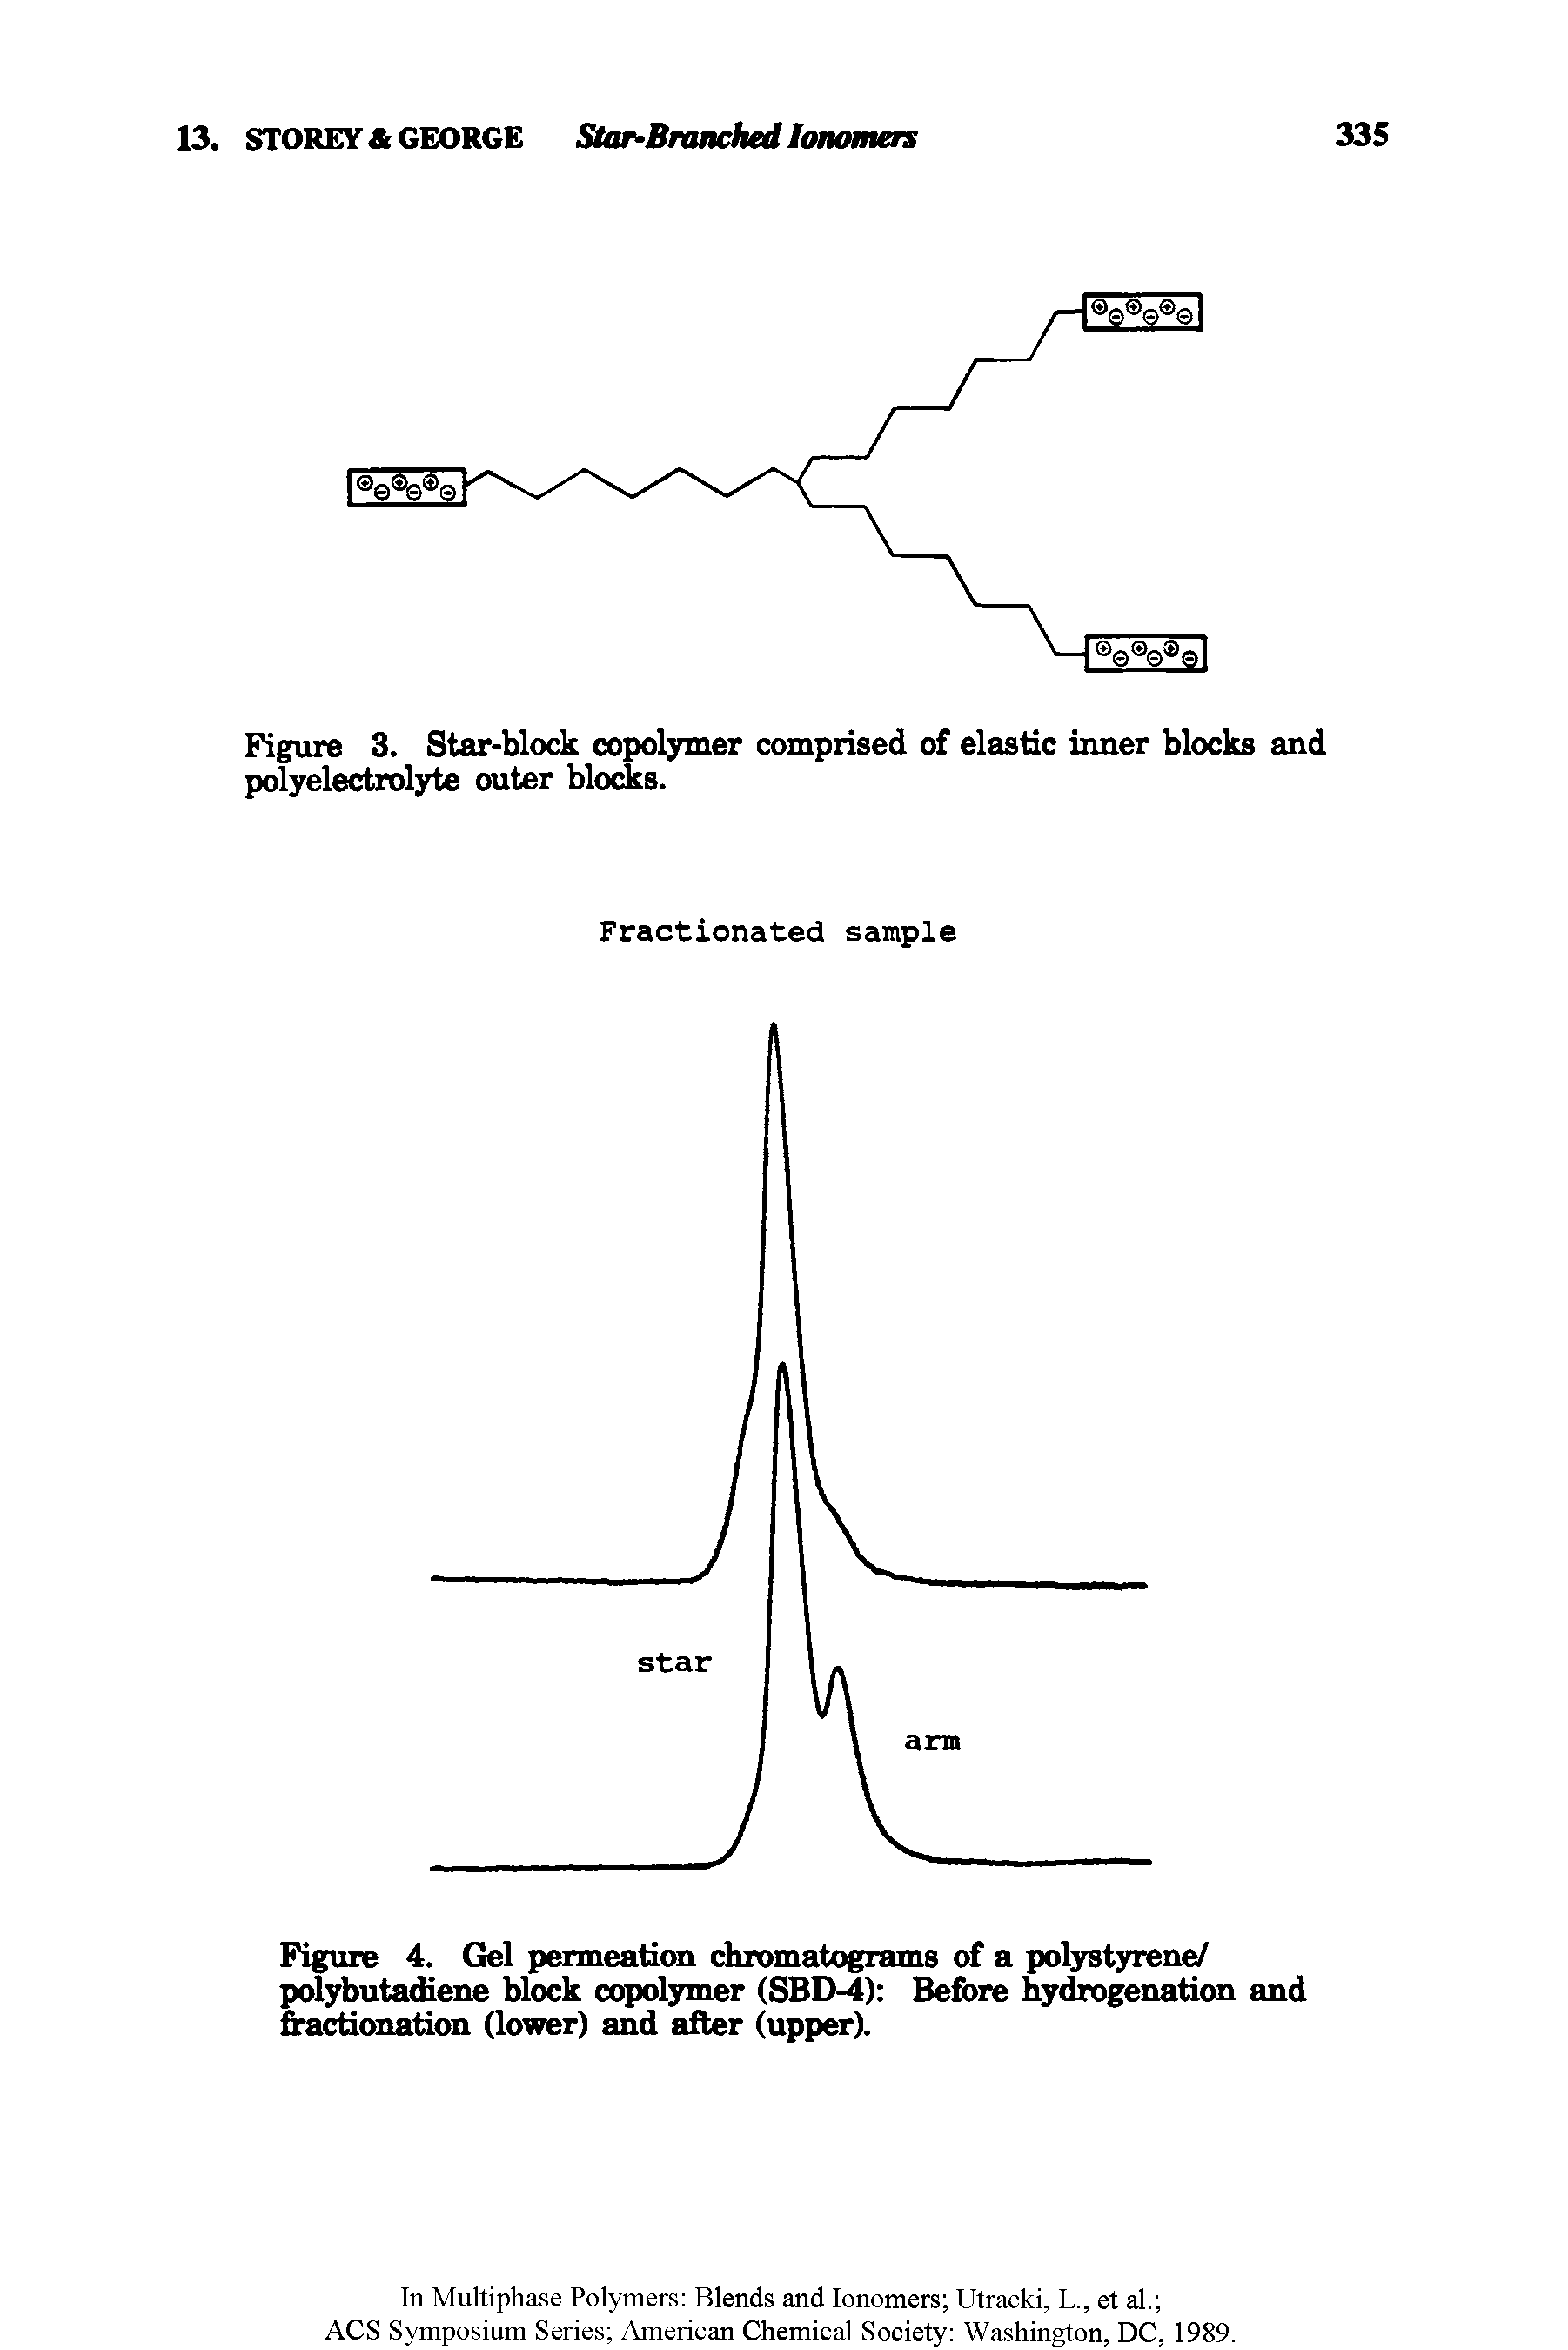 Figure 4. Gel permeation chromatograms of a polystyrene/ polybutadiene block copolymer (SBD-4) Before hydrogenation and fractionation (lower) and after (upper).